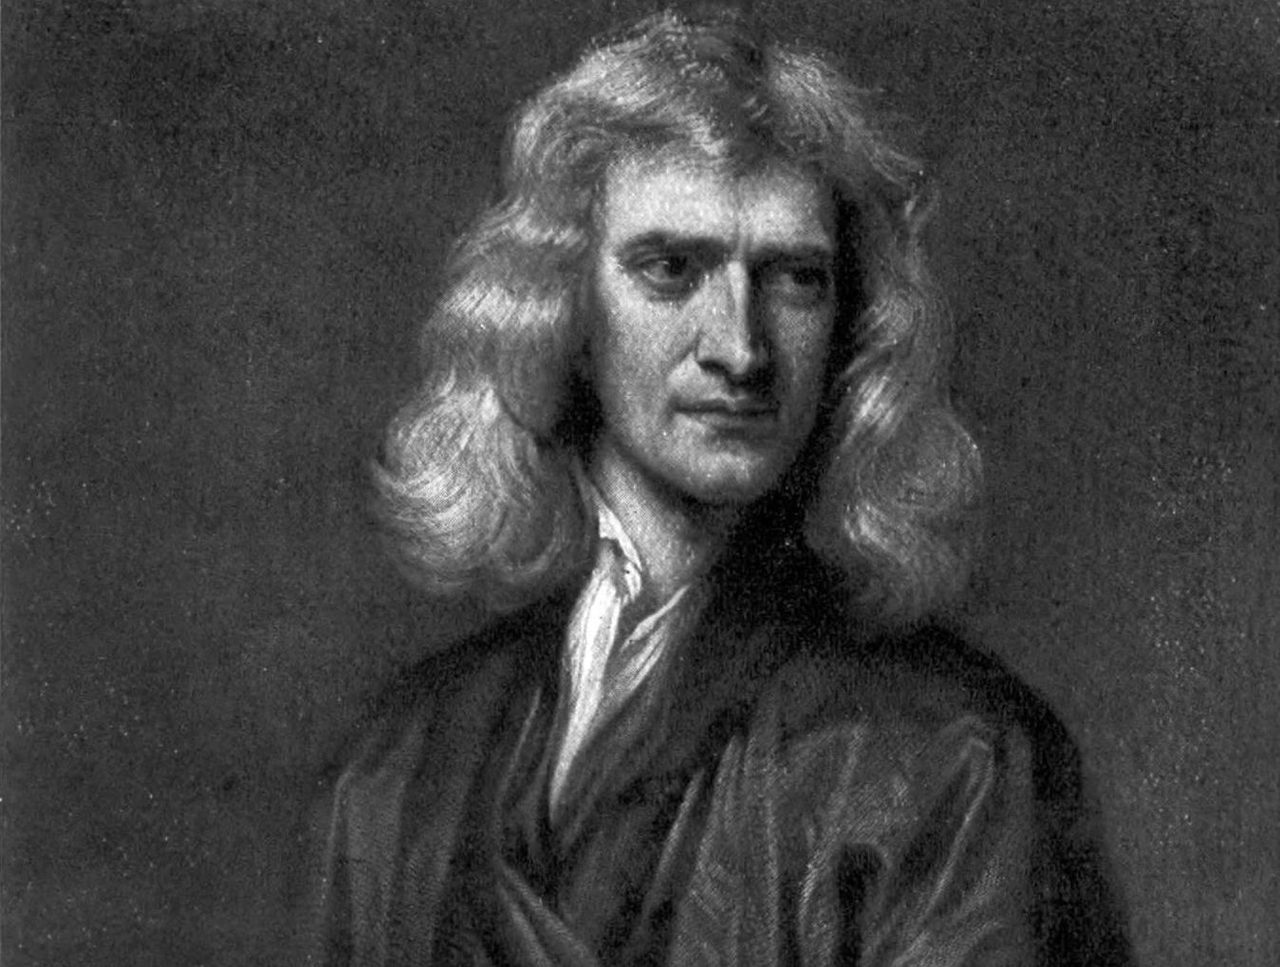 Ever the dutiful student, Isaac Newton took notes while he learned about the plague as a twentysomething.